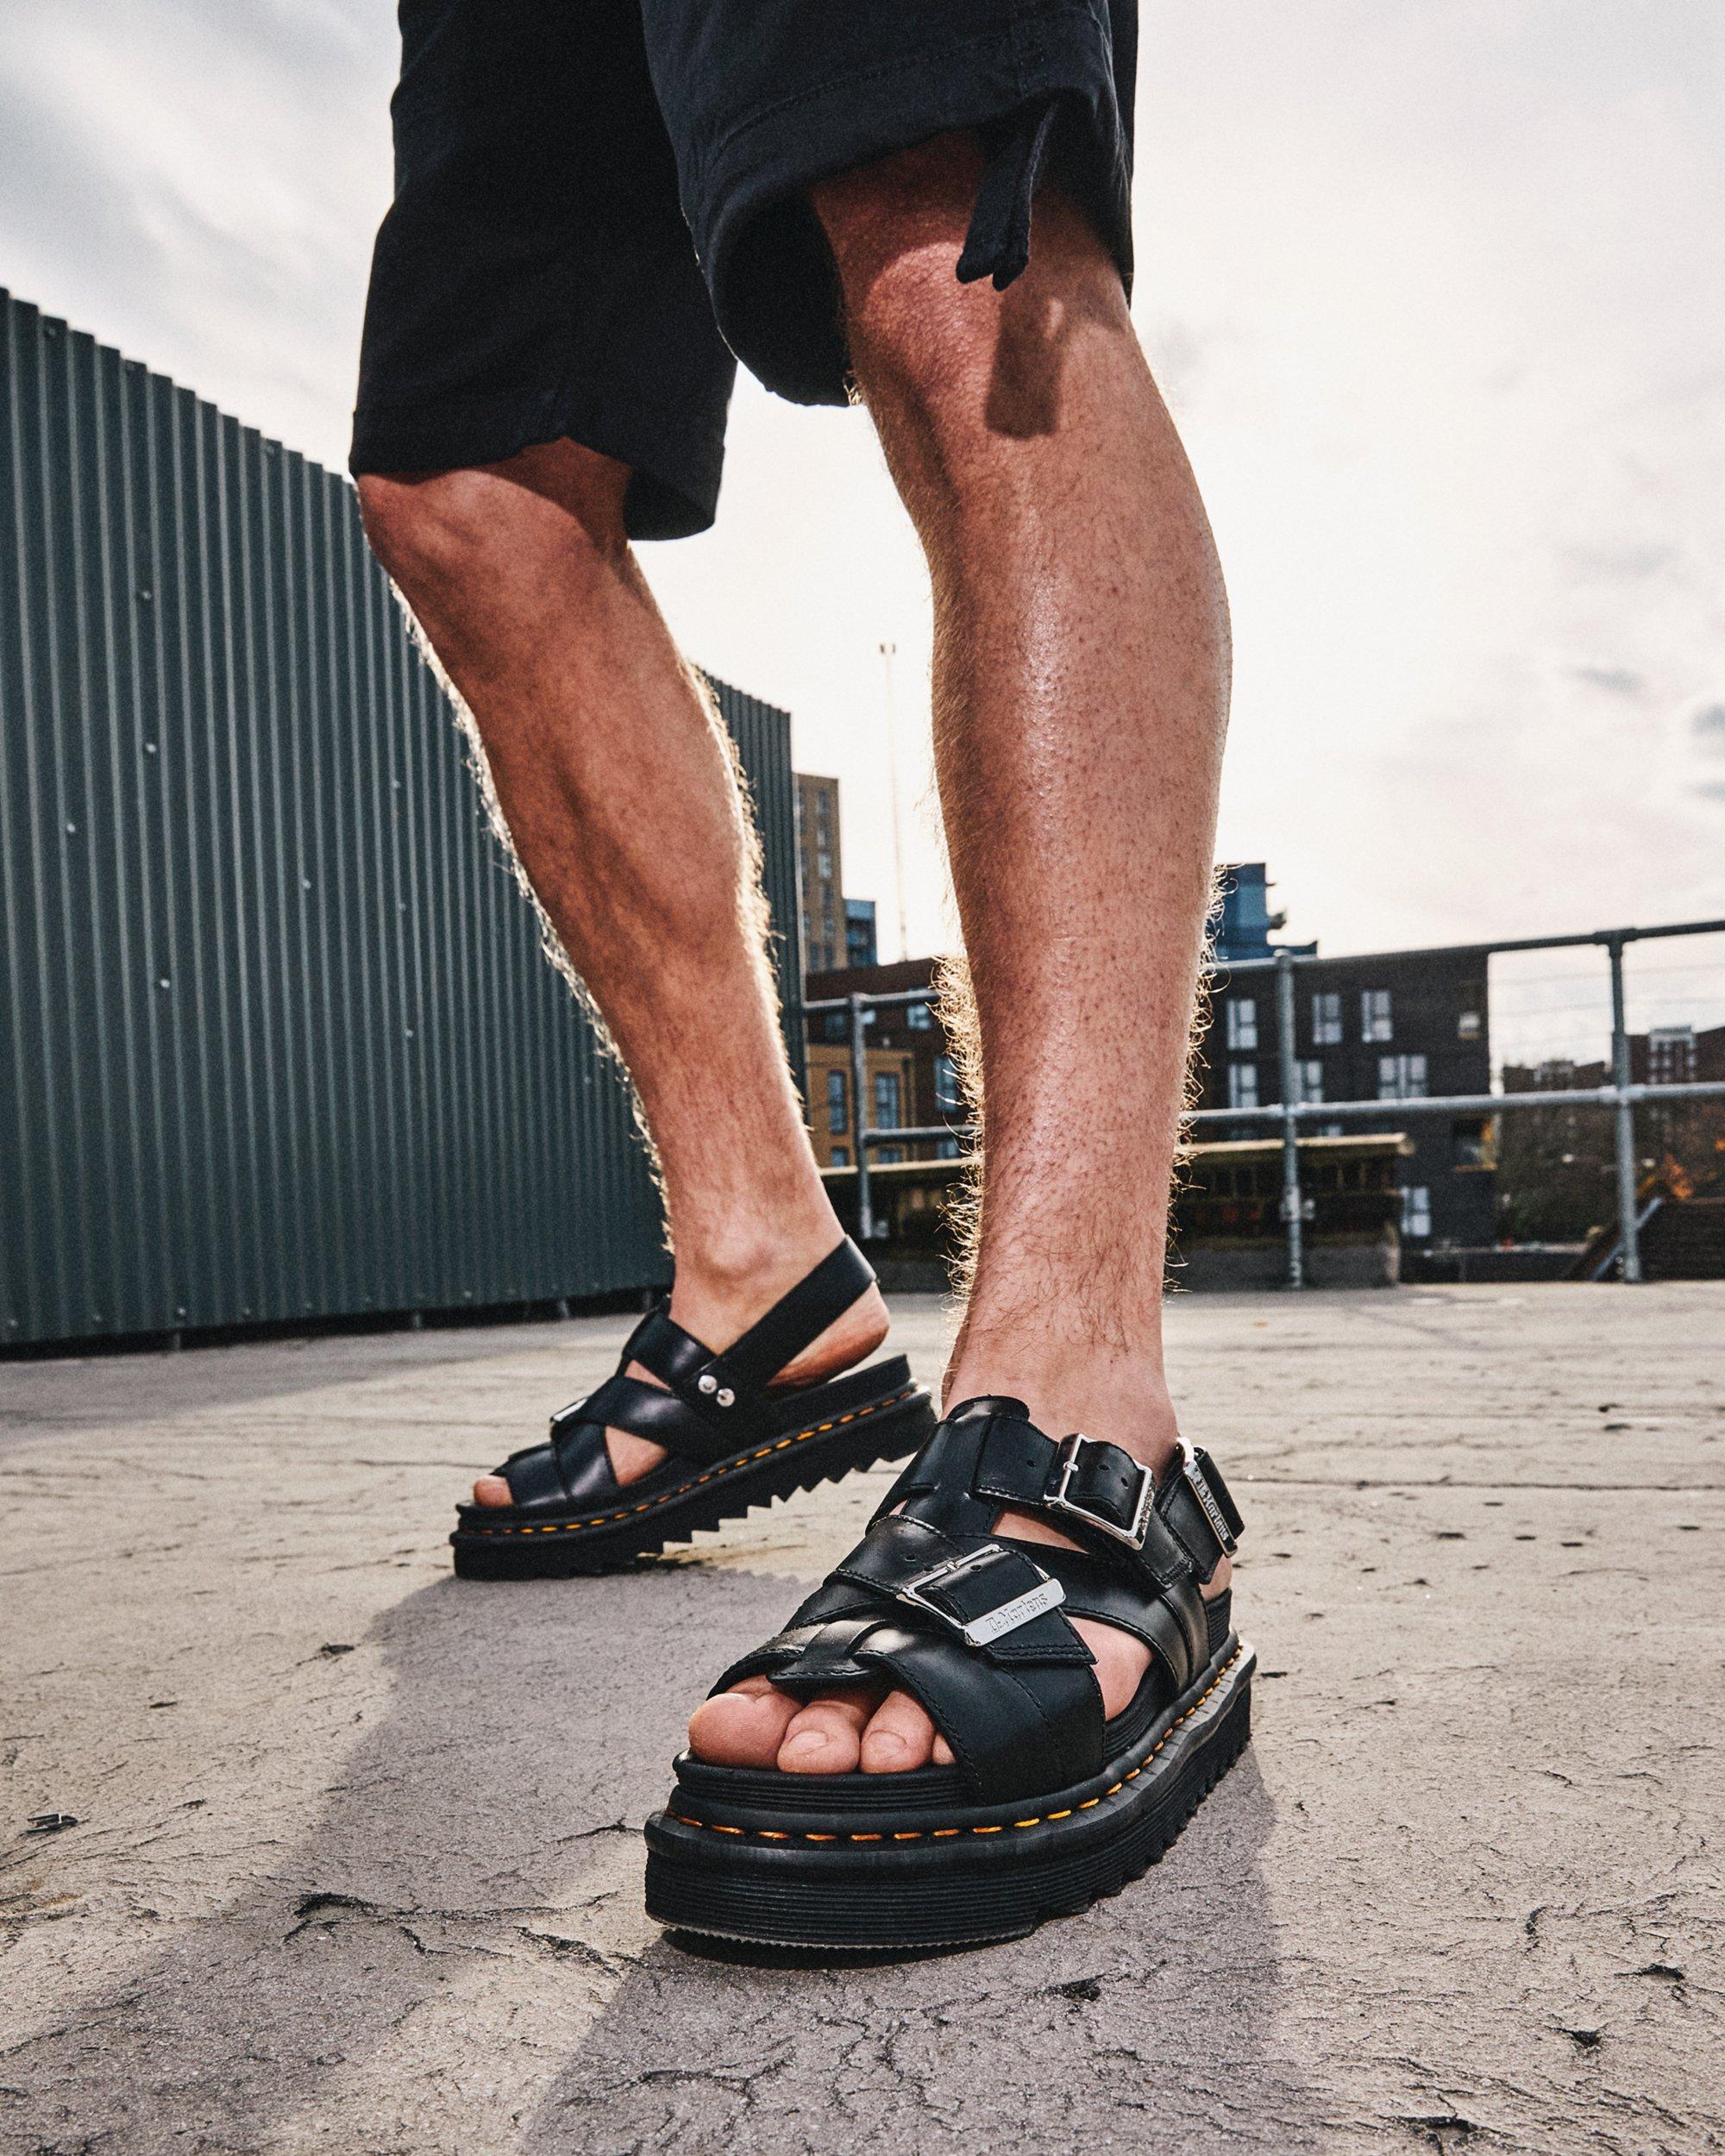 TERRY II LEATHER STRAP SANDALS | Dr. Martens Official